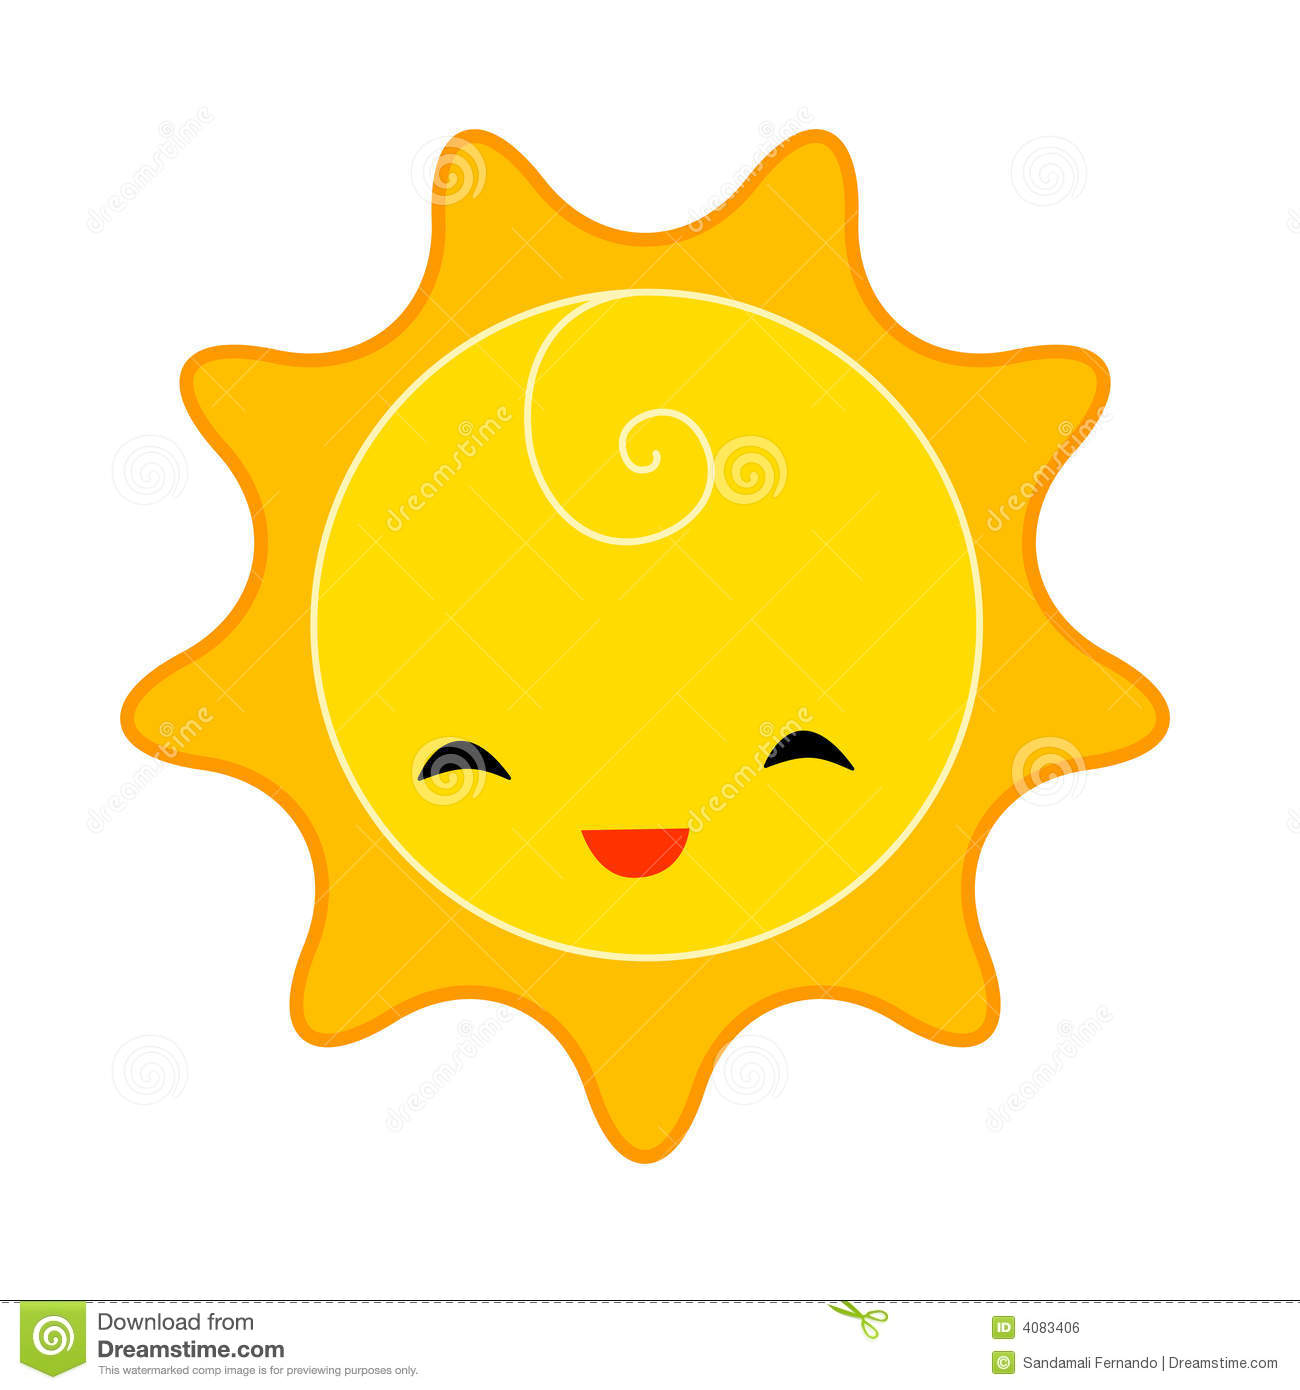 smiling sun clipart royalty free